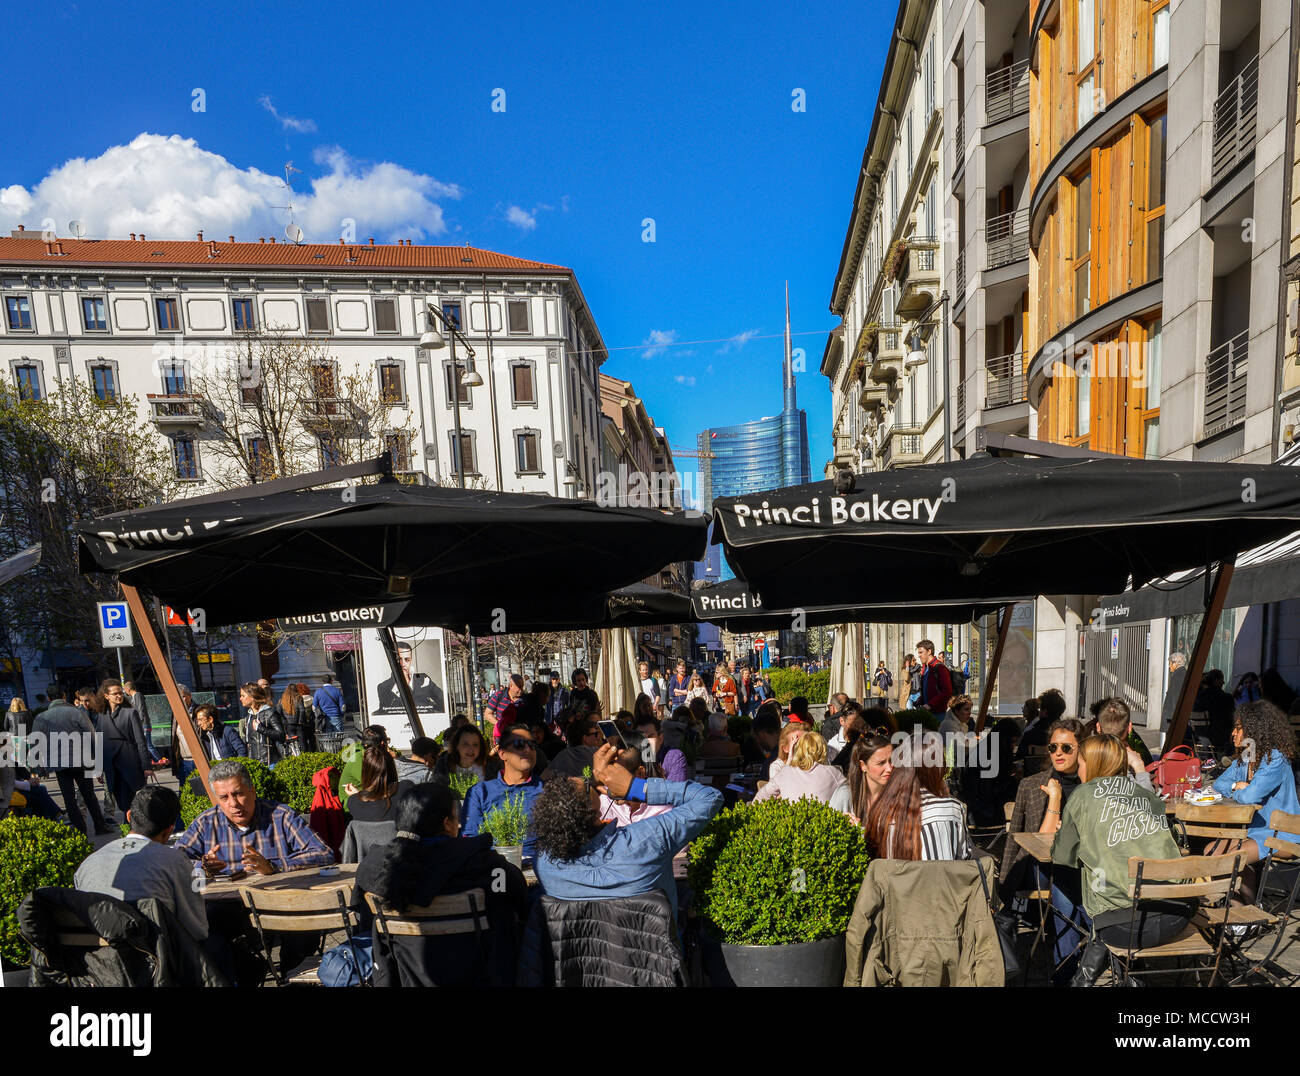 Milan, Italy - April 1st, 2018: A crowded cafe on Corso Garibaldi, one of Milan's most fashionable streets Stock Photo